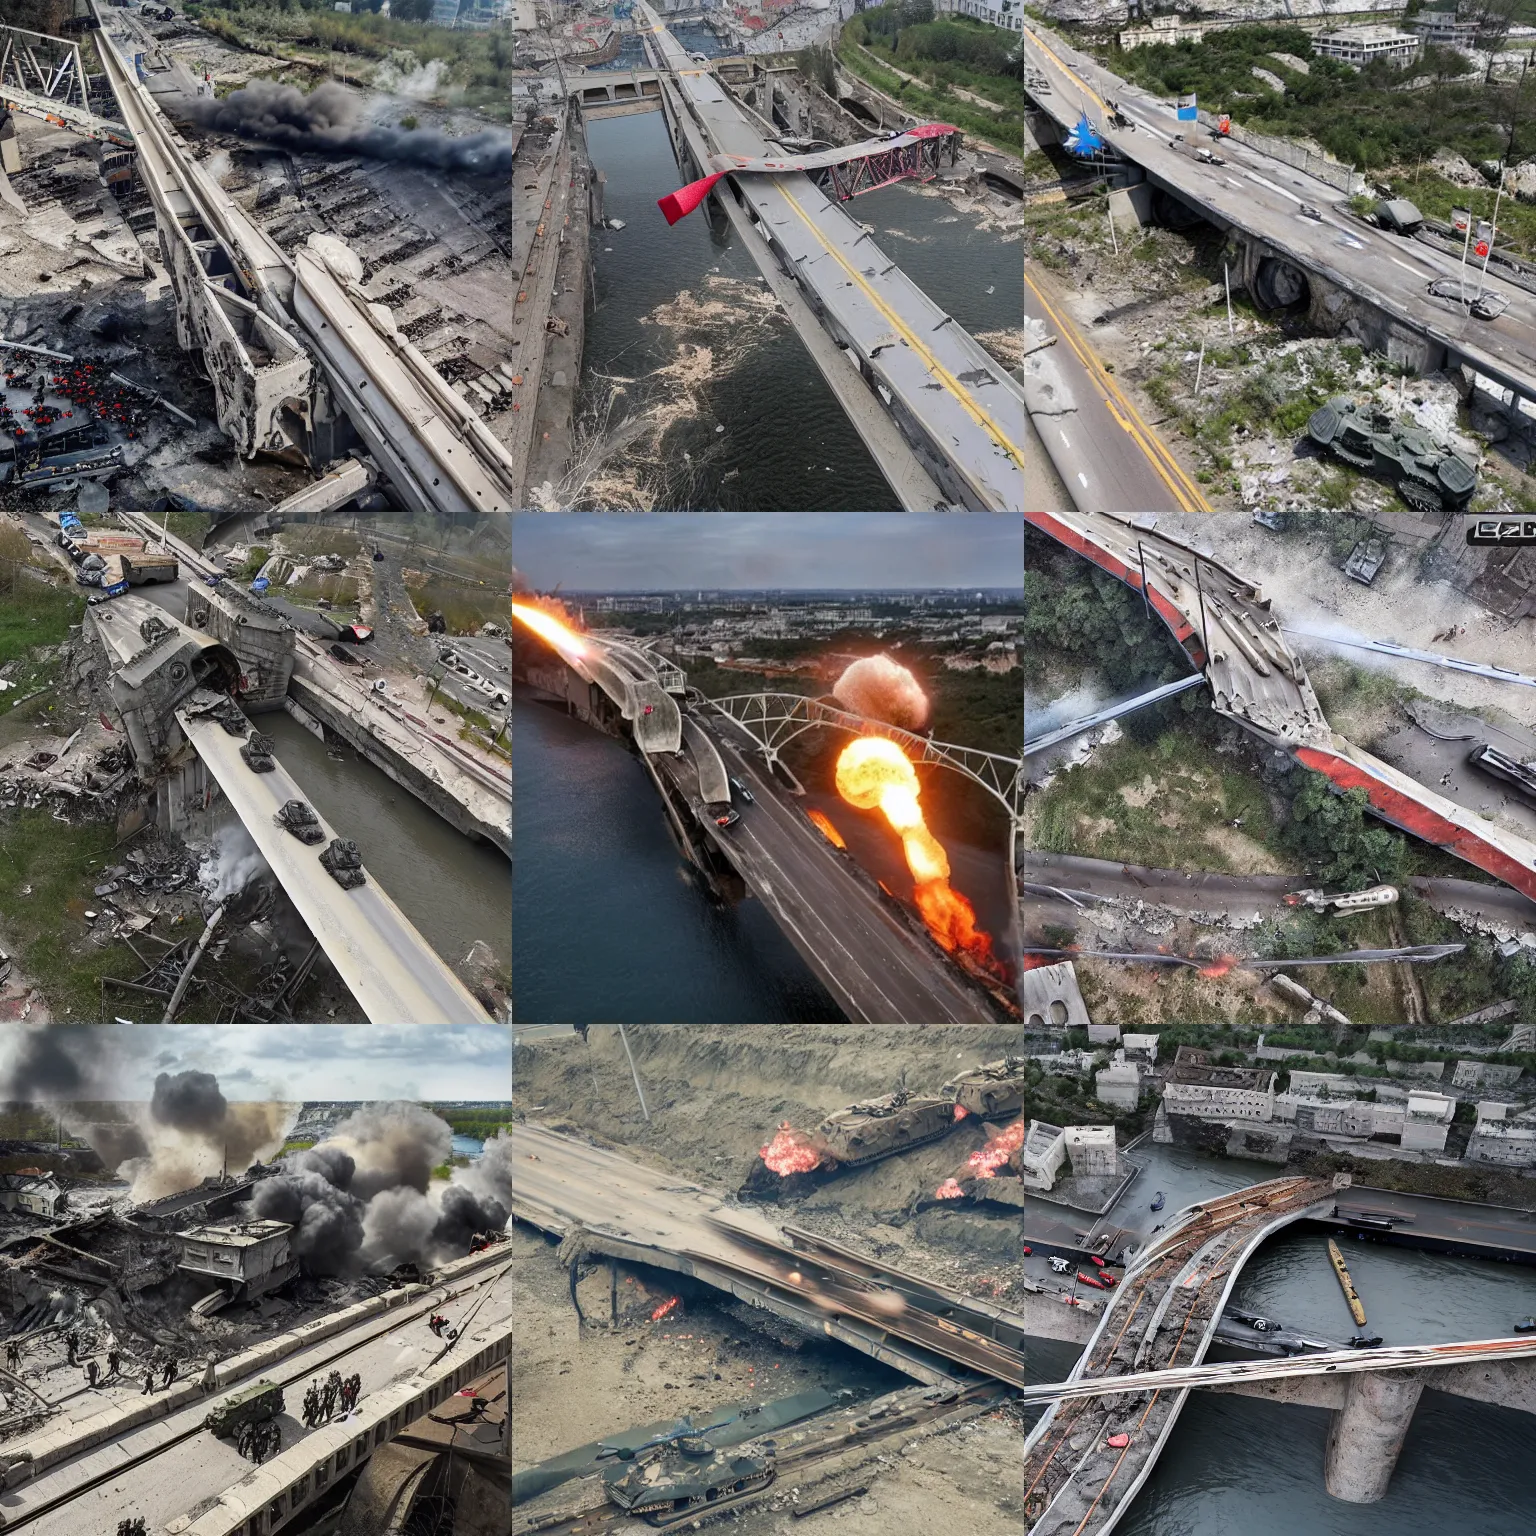 Prompt: war in ukraine, 2 0 2 2, artillery strike in crimea bridge, bridge collapsing, wide angle shot, aerial photograph, hyper realistic, structural failure, catastrophic, explosion, cars flying, tanks, infantry, gruesome, horror